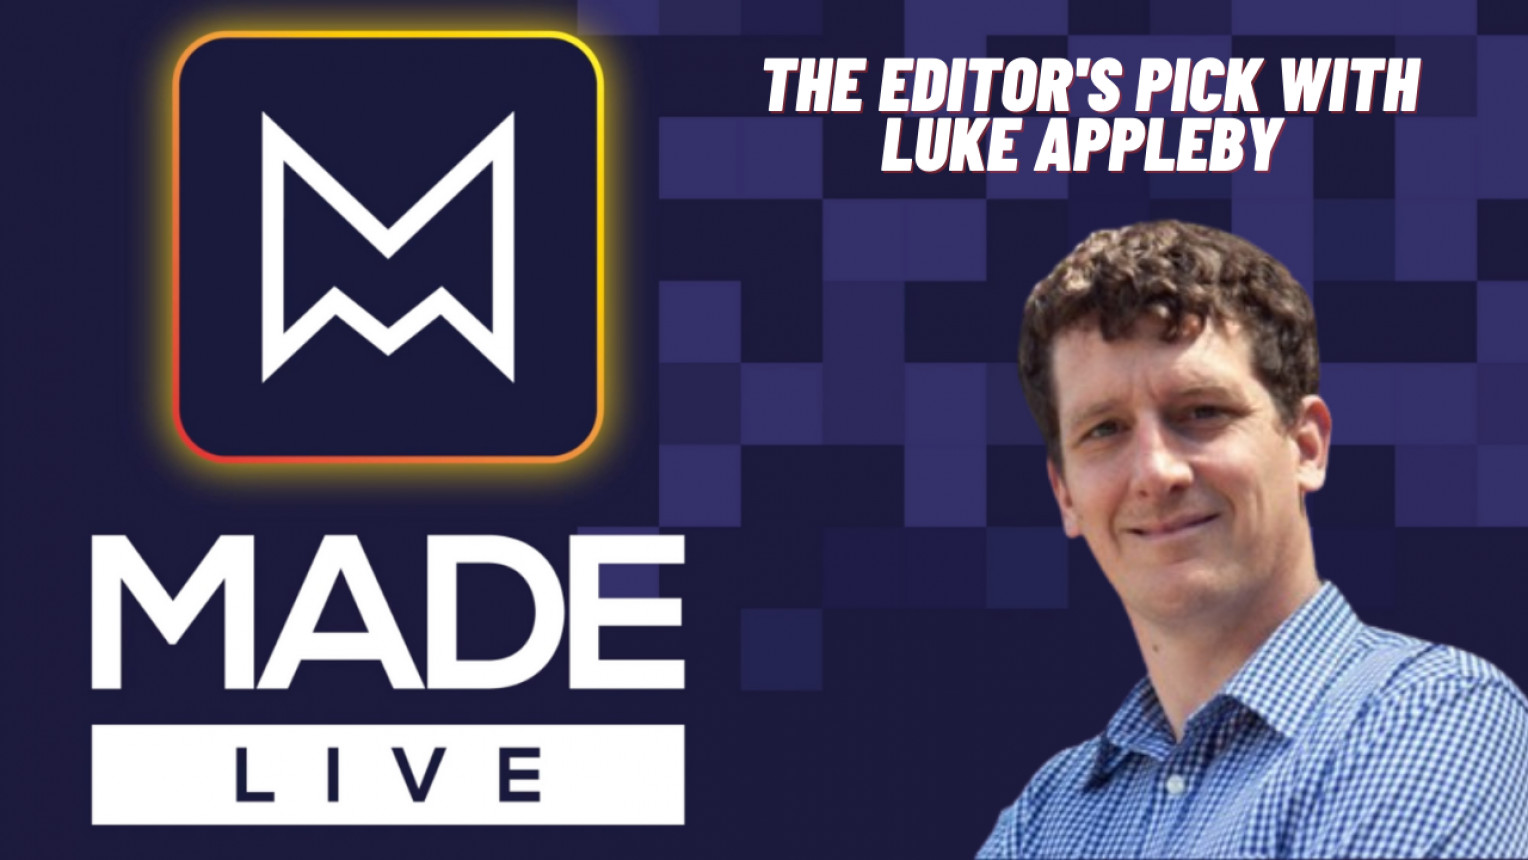 Made LIVE TV: The Editor's Pick with Luke Appleby